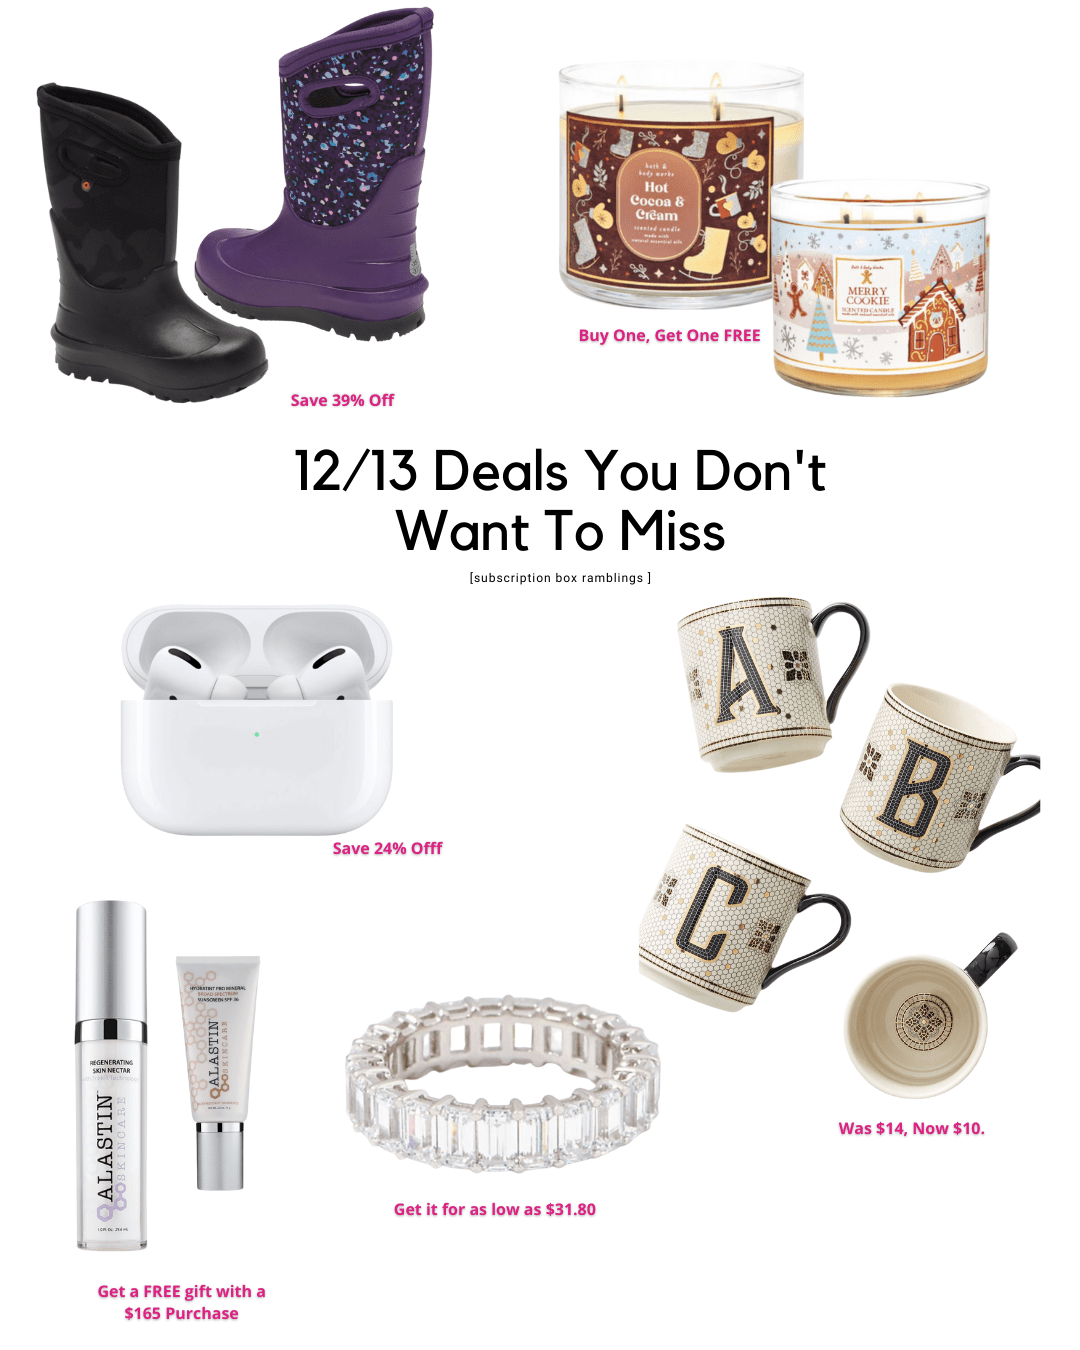 Deals You Don’t Want to Miss – 12/13